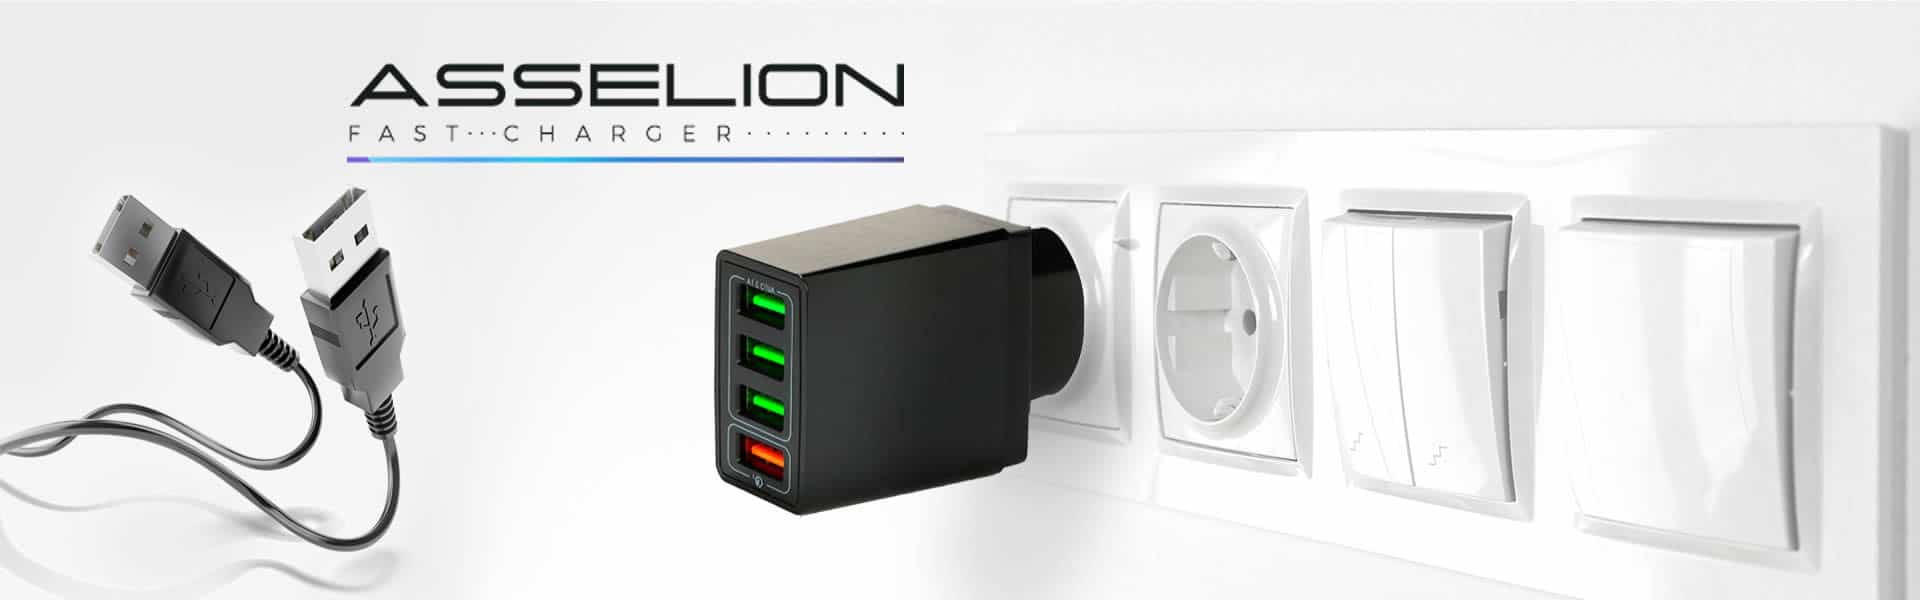 Asselion Fast Charger, ביקורות וחוות דעת